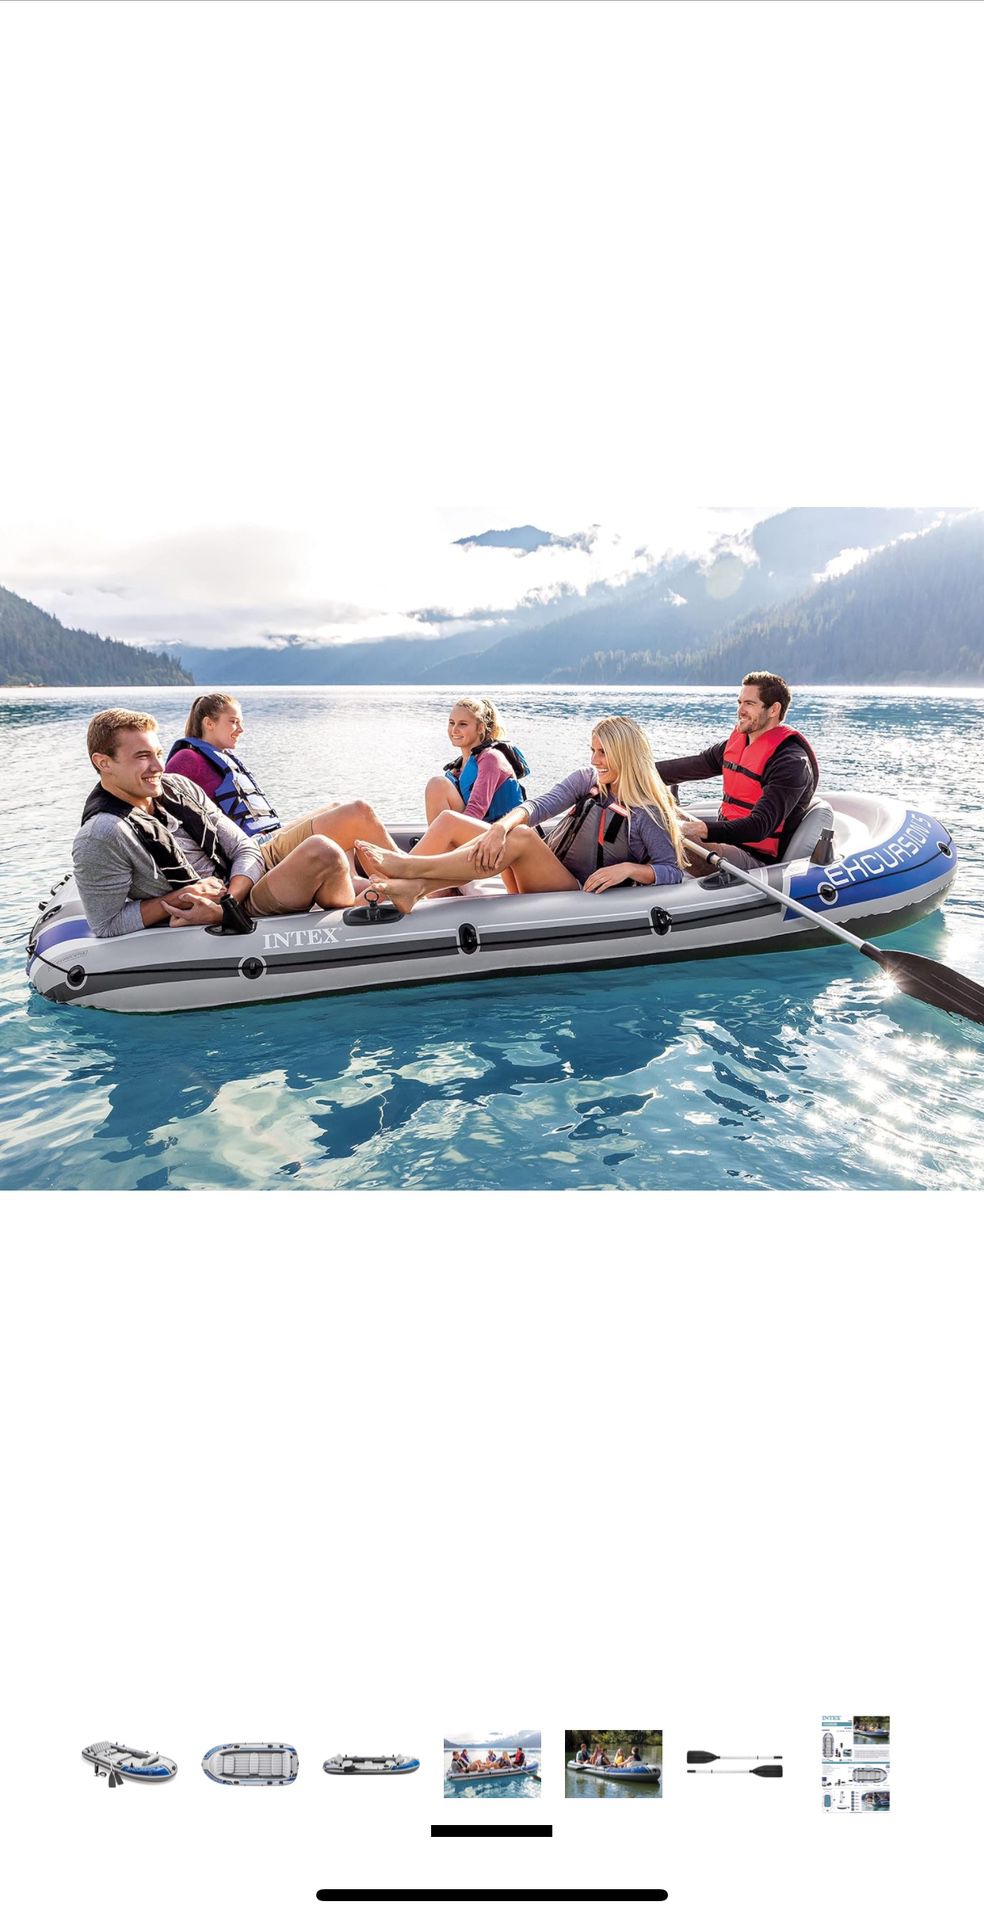 Excursion Inflatable 5 Seater Boat